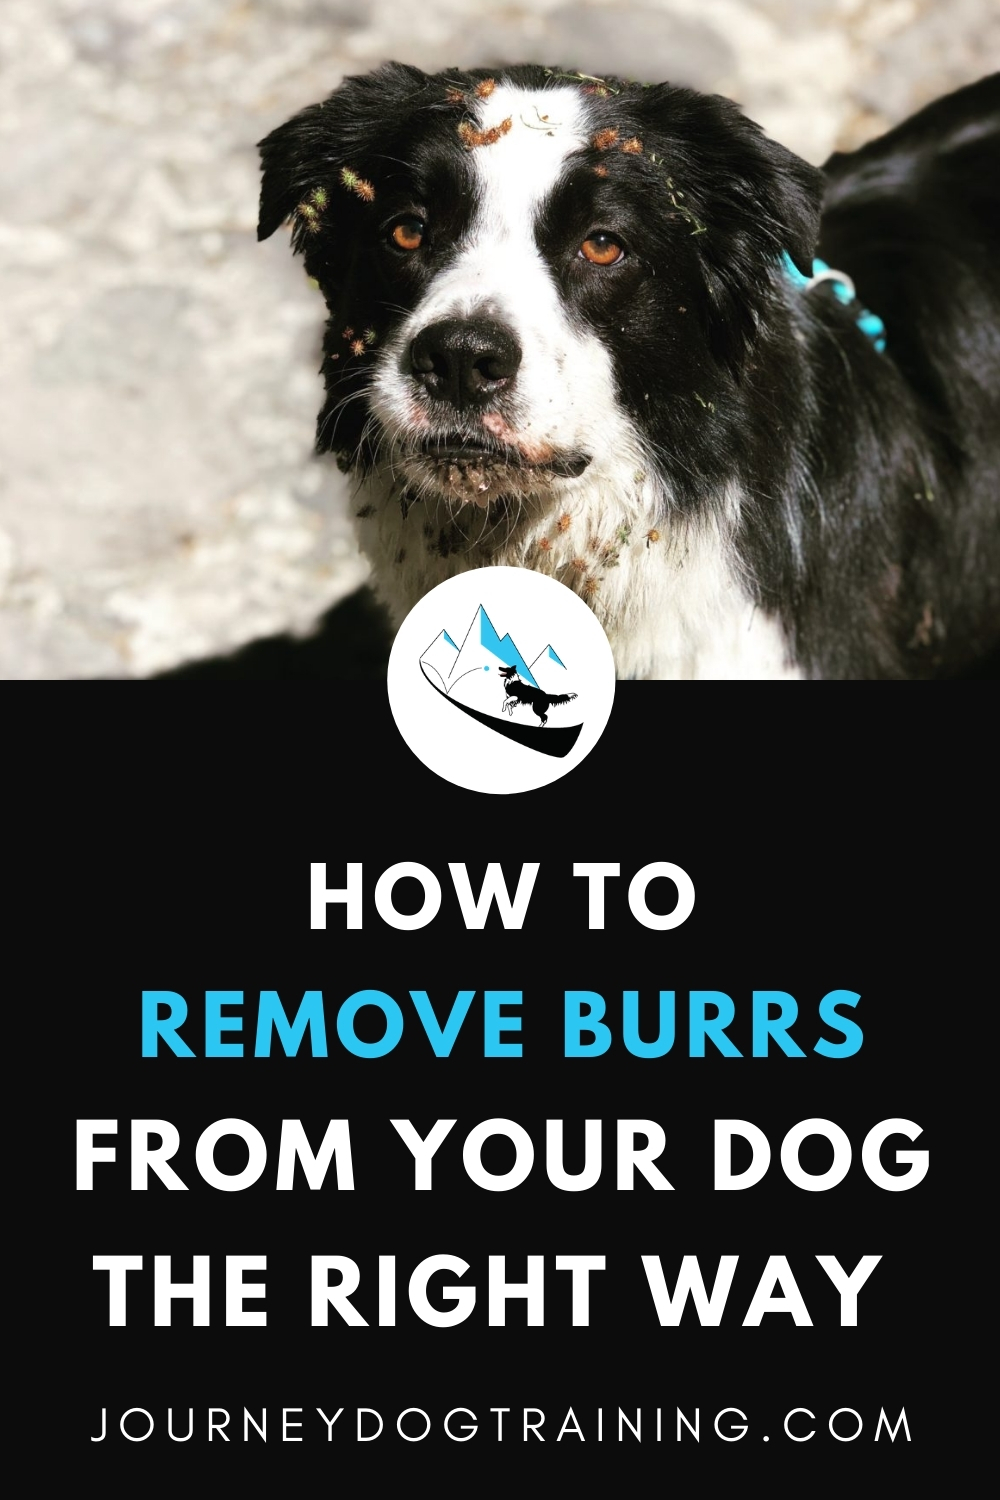 how to remove burrs from your dog the right way | journeydogtraining.com